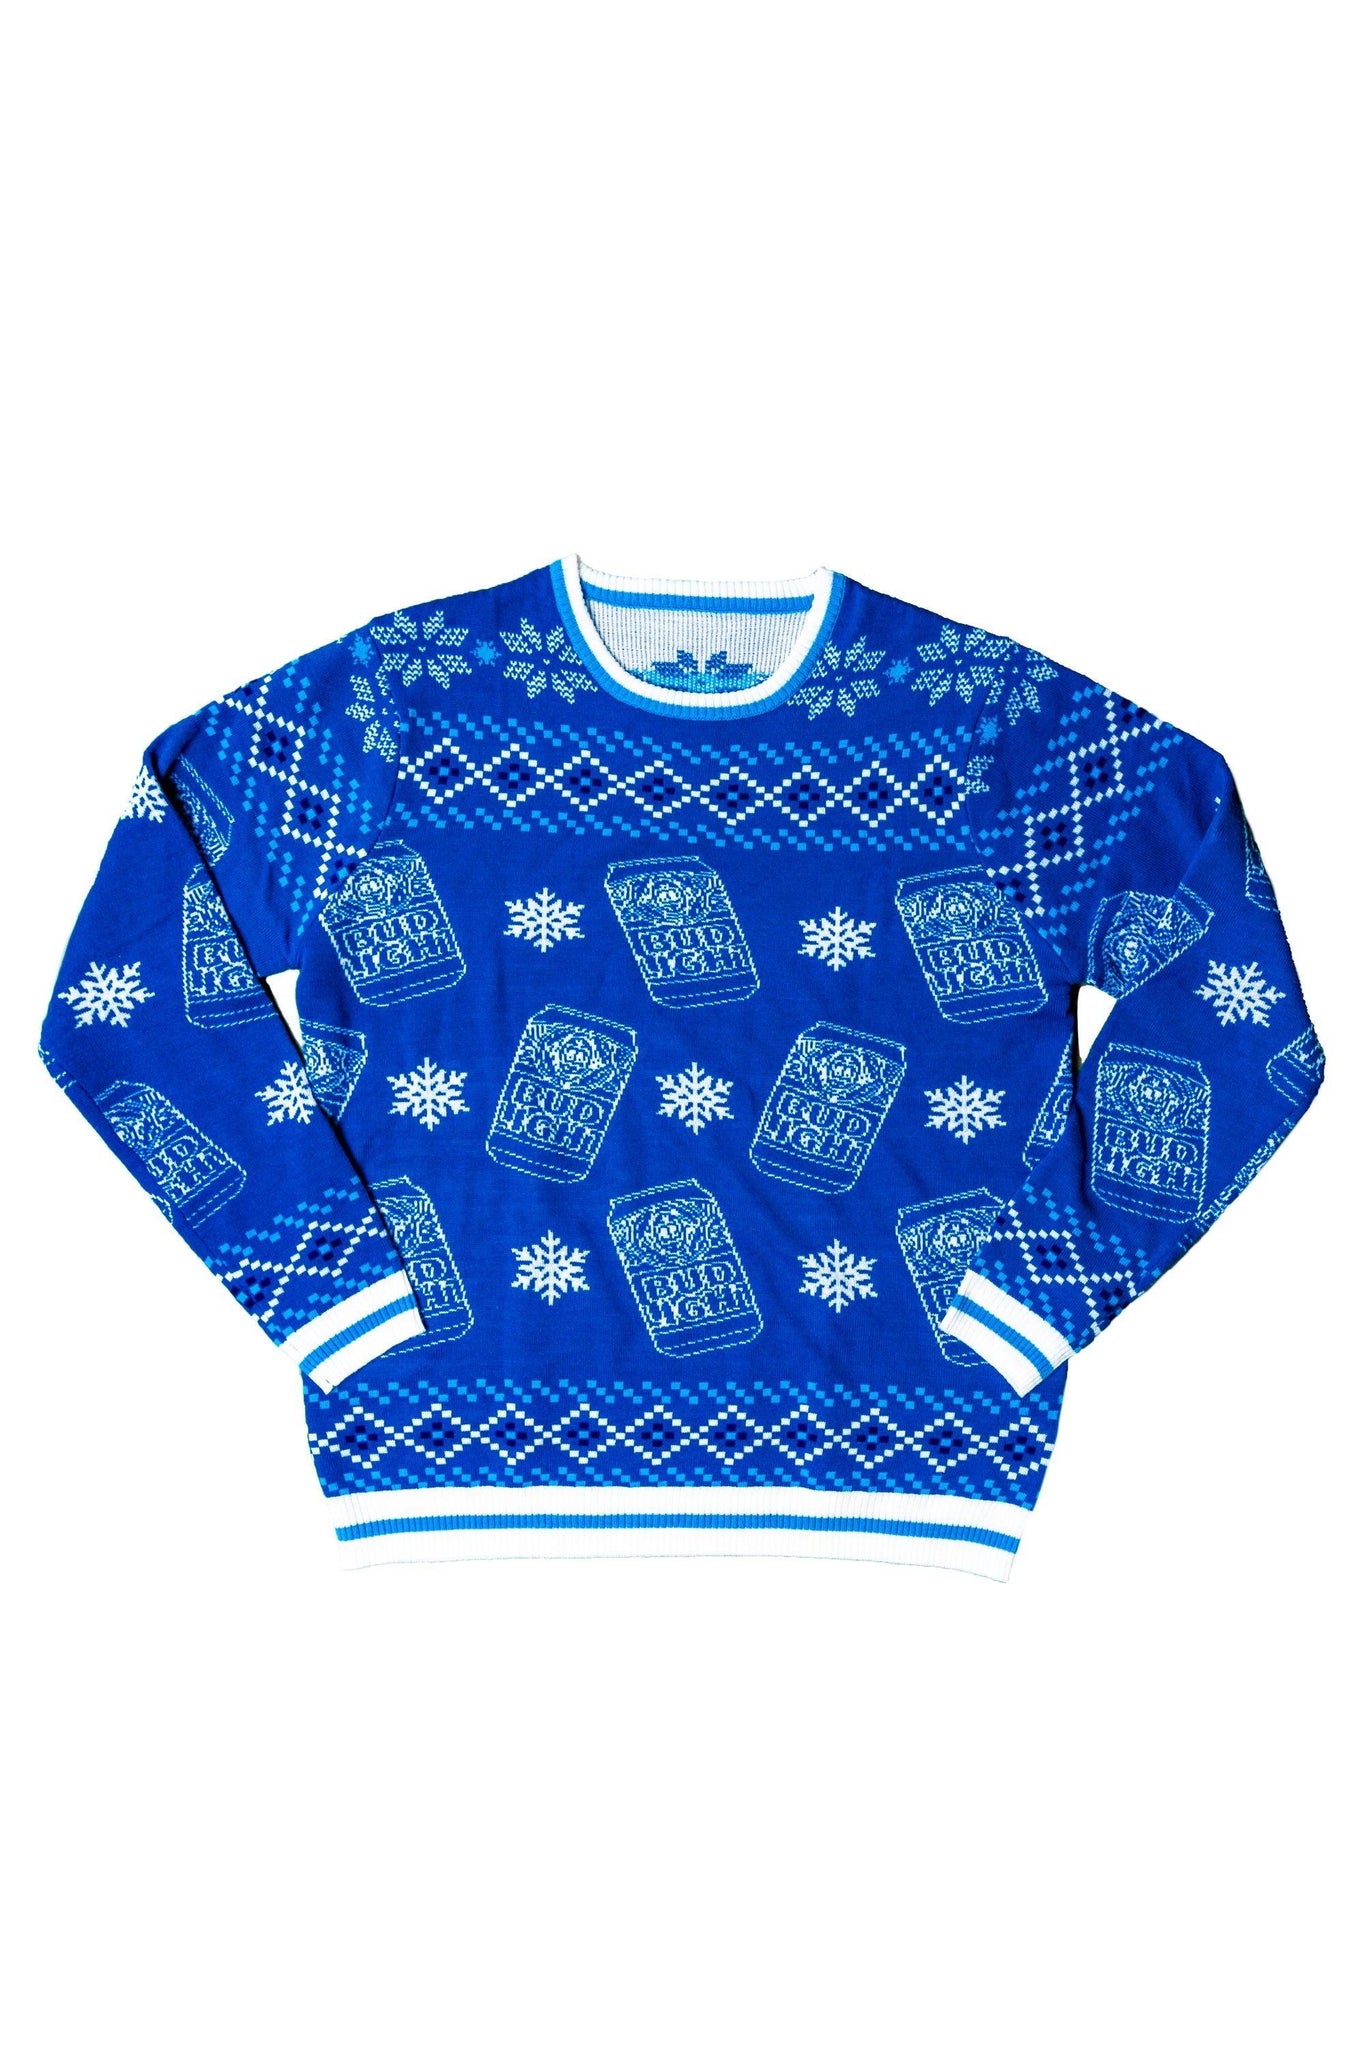 blue bud light repeat can sweater